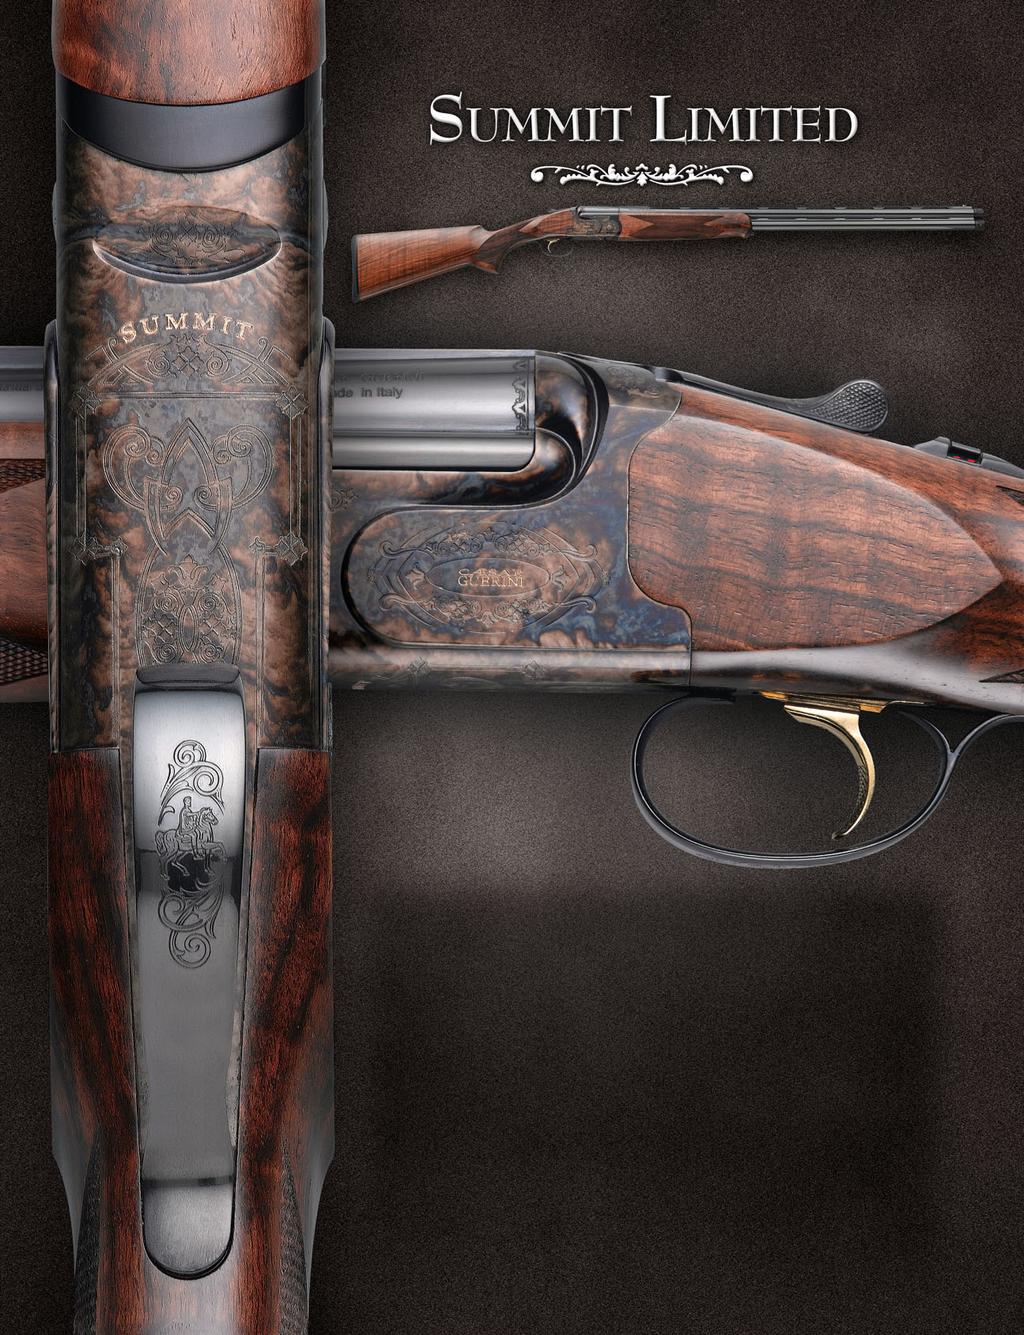 The Summit Limited embodies all the balance, quick handling and accurate performance qualities of the popular Summit Sporting and adds a deluxe grade of oil finished, hand rubbed Turkish walnut with